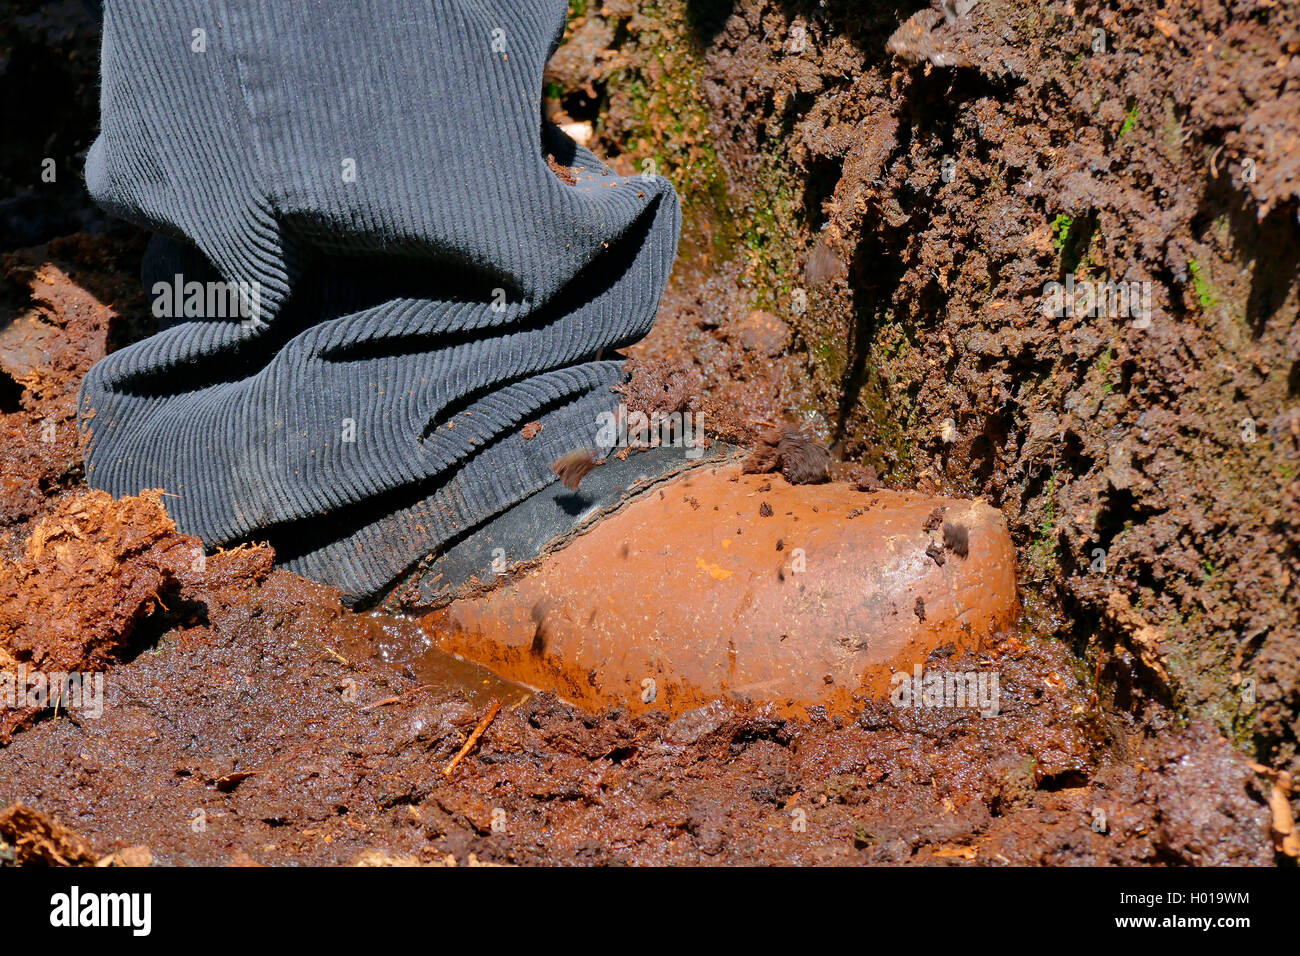 wooden shoe of a peat cutter in peat, Germany, Lower Saxony Stock Photo